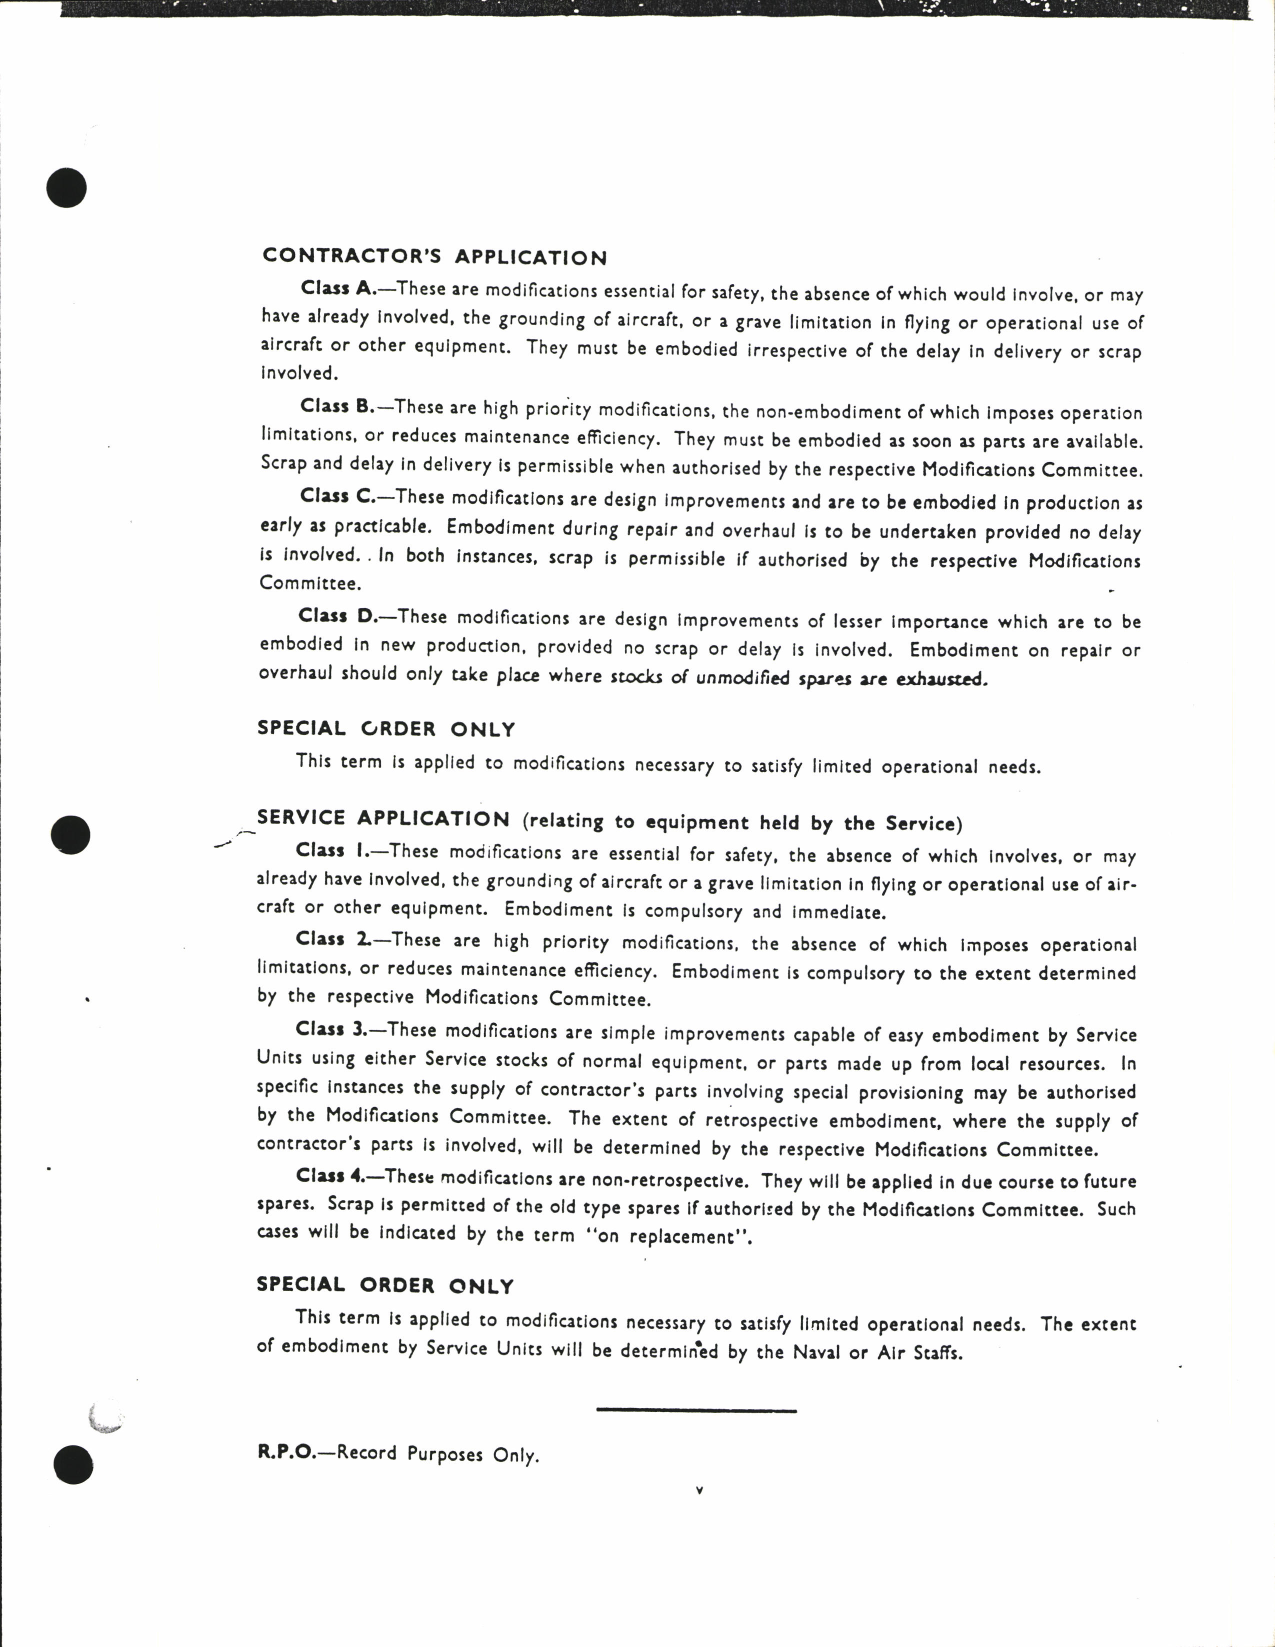 Sample page 7 from AirCorps Library document: Numerical List of Modifications on Rolls Royce Merlin Engines